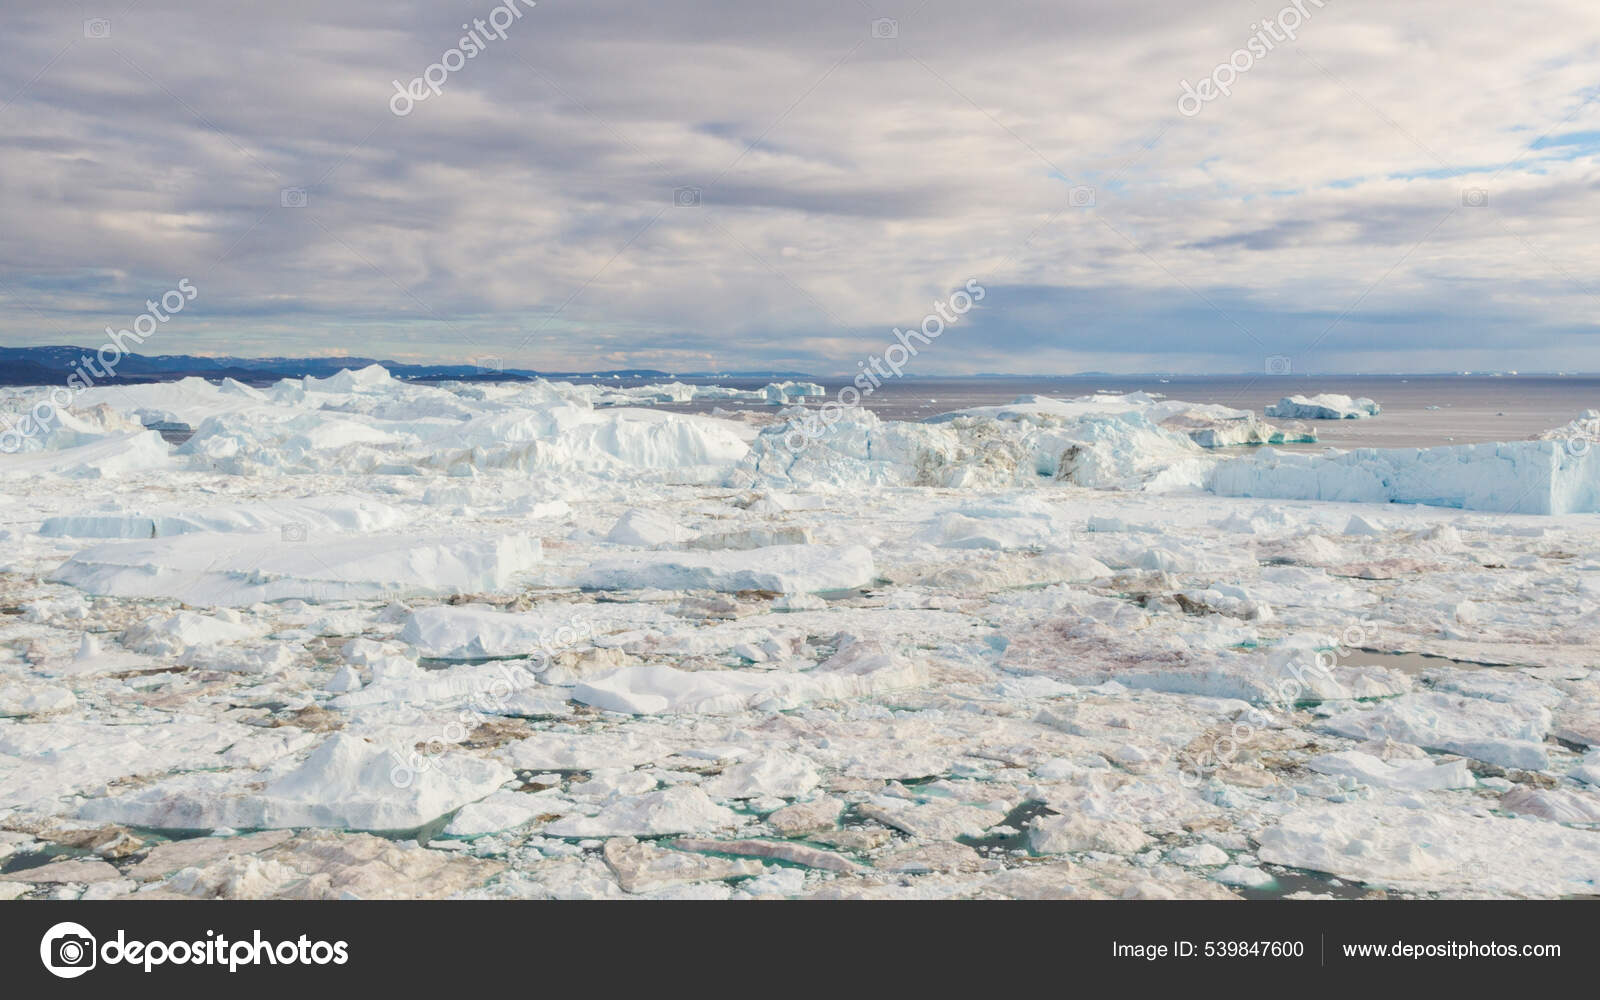 Climate Change and Global Warming. Iceberg from glacier in arctic nature landscape on Greenland. Icebergs in Ilulissat icefjord. Melting of glaciers and Greenland ice sheet cause sea levels rise. 539847600